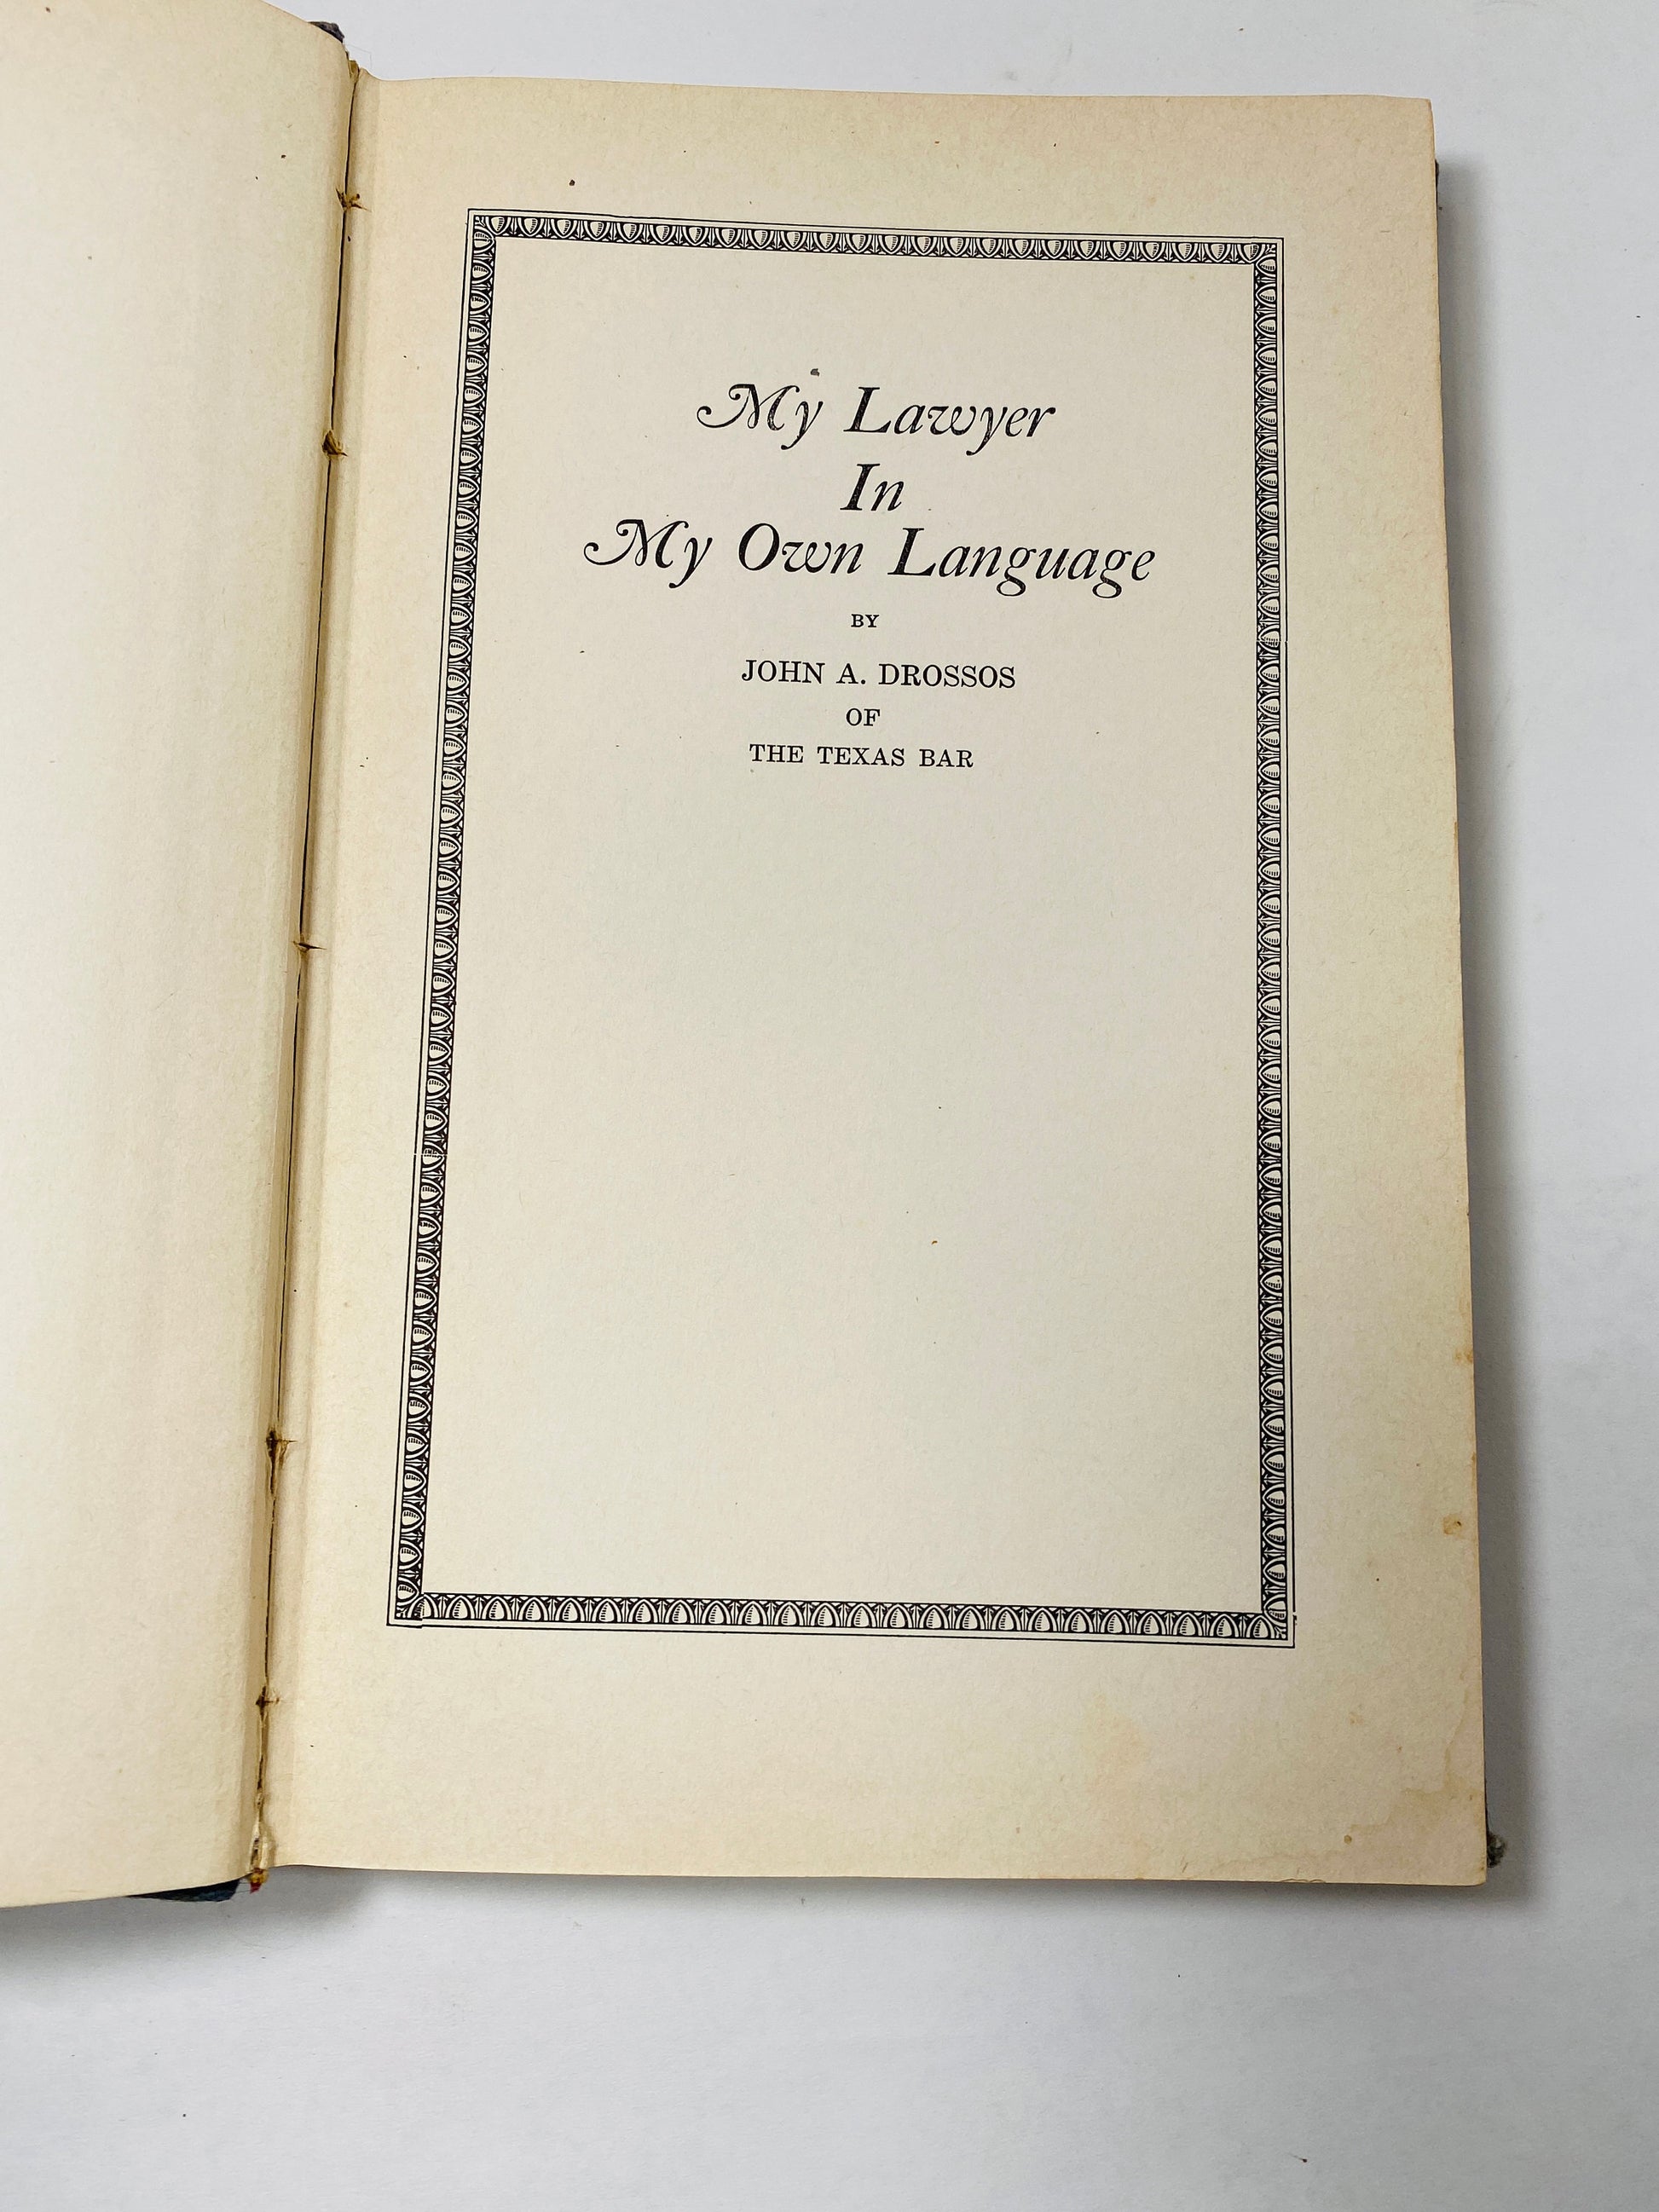 RARE Law Antique book circa 1933 FIRST EDITION Texas law treatise in the layman's language Attorney lawyer decor